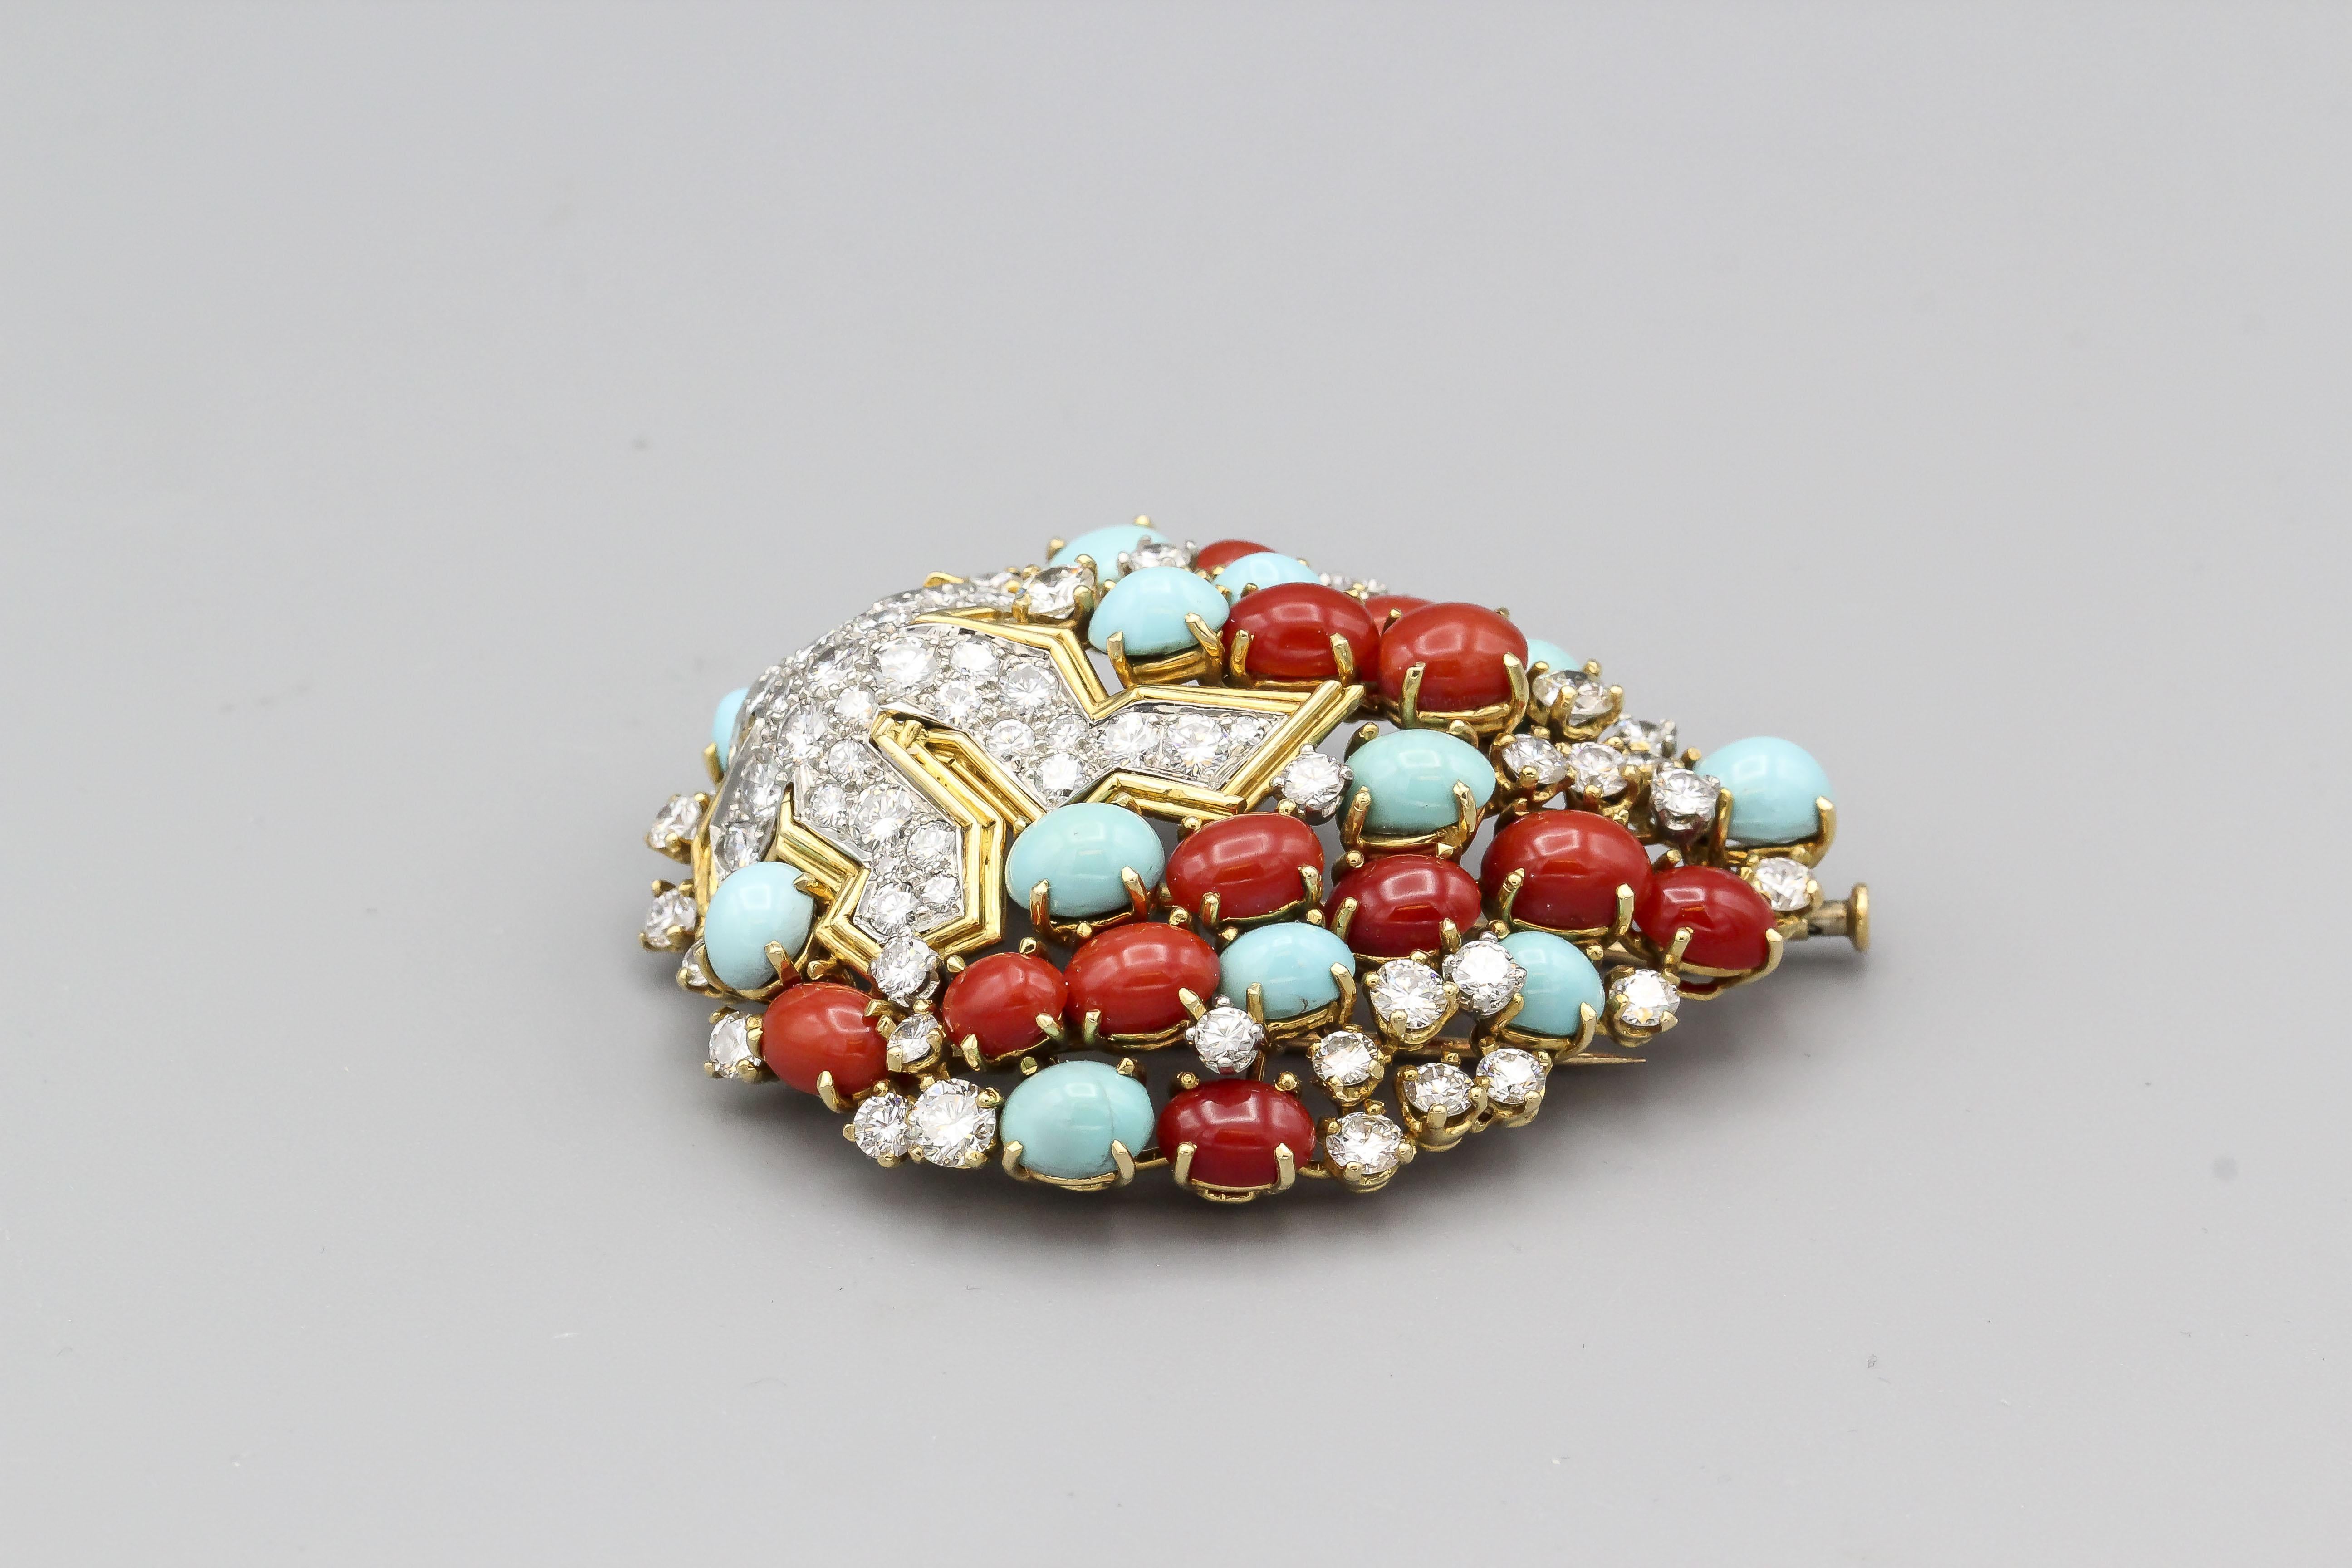 Tiffany & Co. Schlumberger Coral Turquoise Diamond Platinum 18k Gold Brooch In Good Condition For Sale In Bellmore, NY